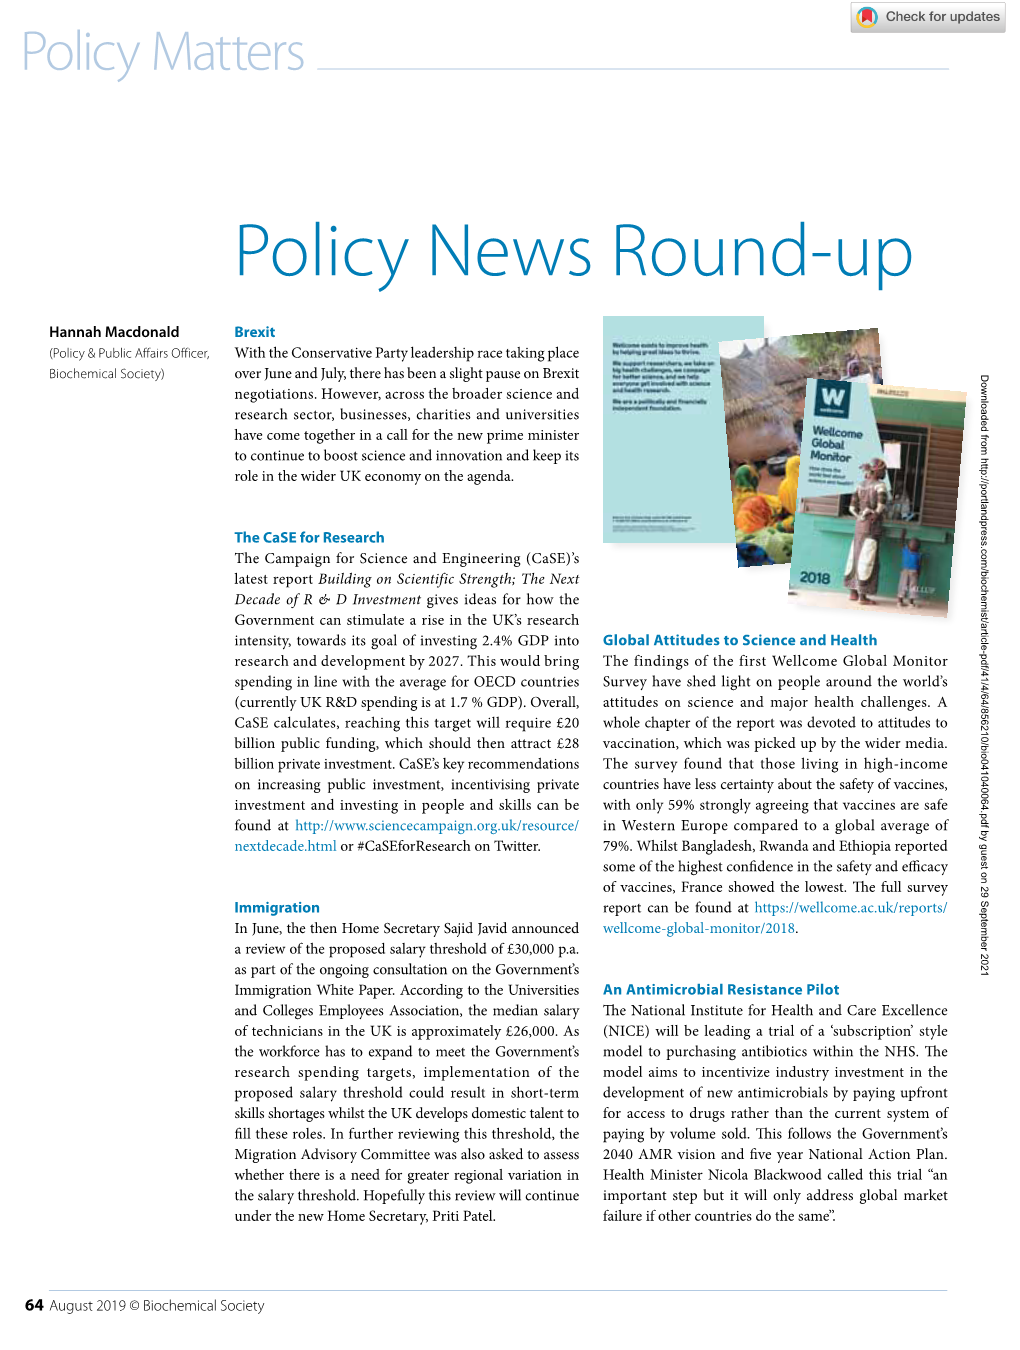 Policy News Round-Up